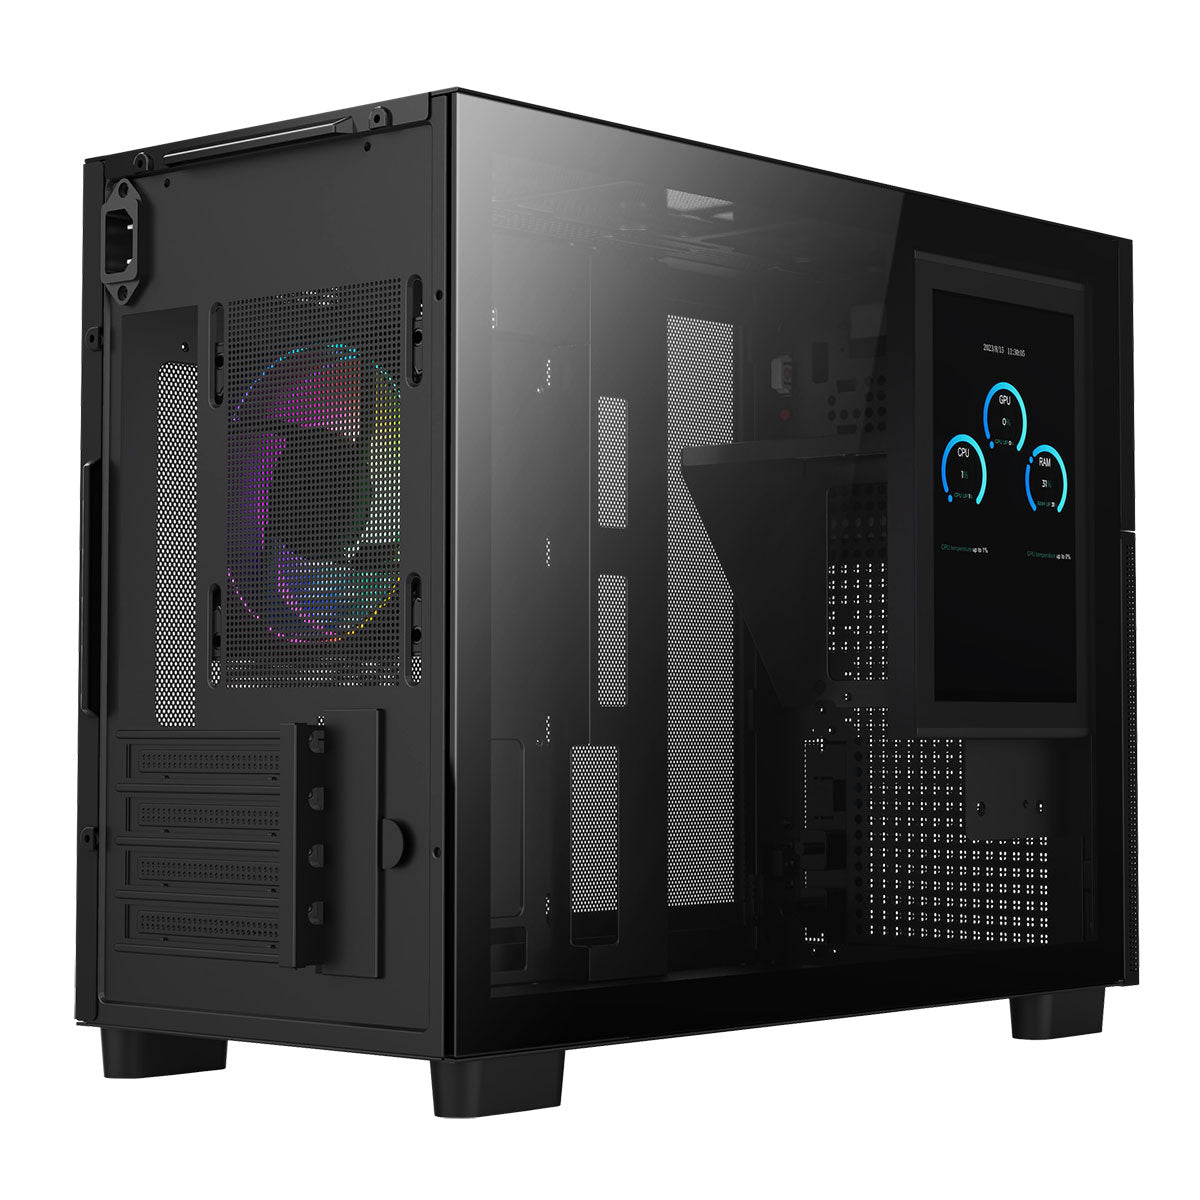 CiT Pro Jupiter Black Micro-ATX PC Gaming Case with 8 Inch LCD Screen 1 x 120mm Infinity Fan Included, USB-C, Tempered Glass Side Panel.